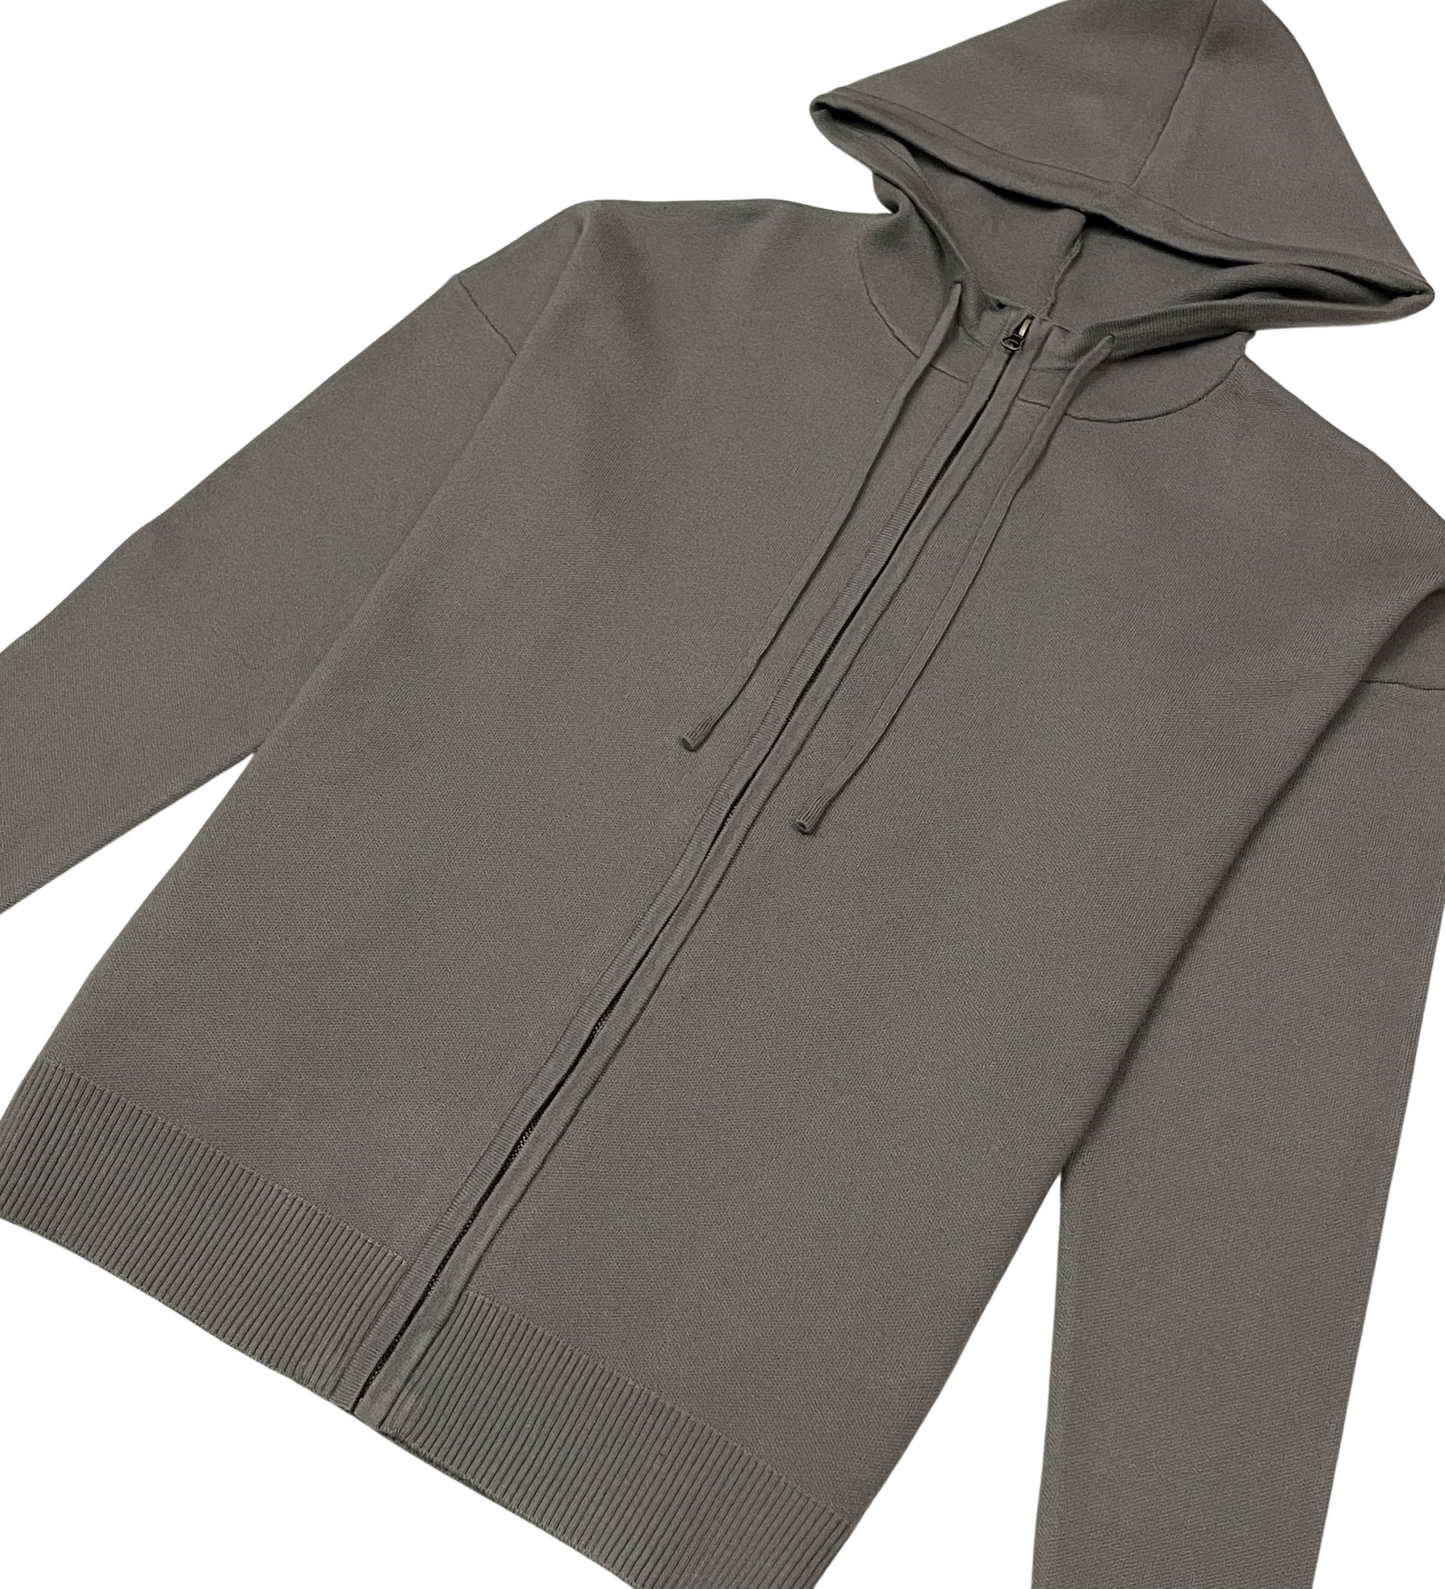 Viscos Poly Double Knit Zip Up Hoodie